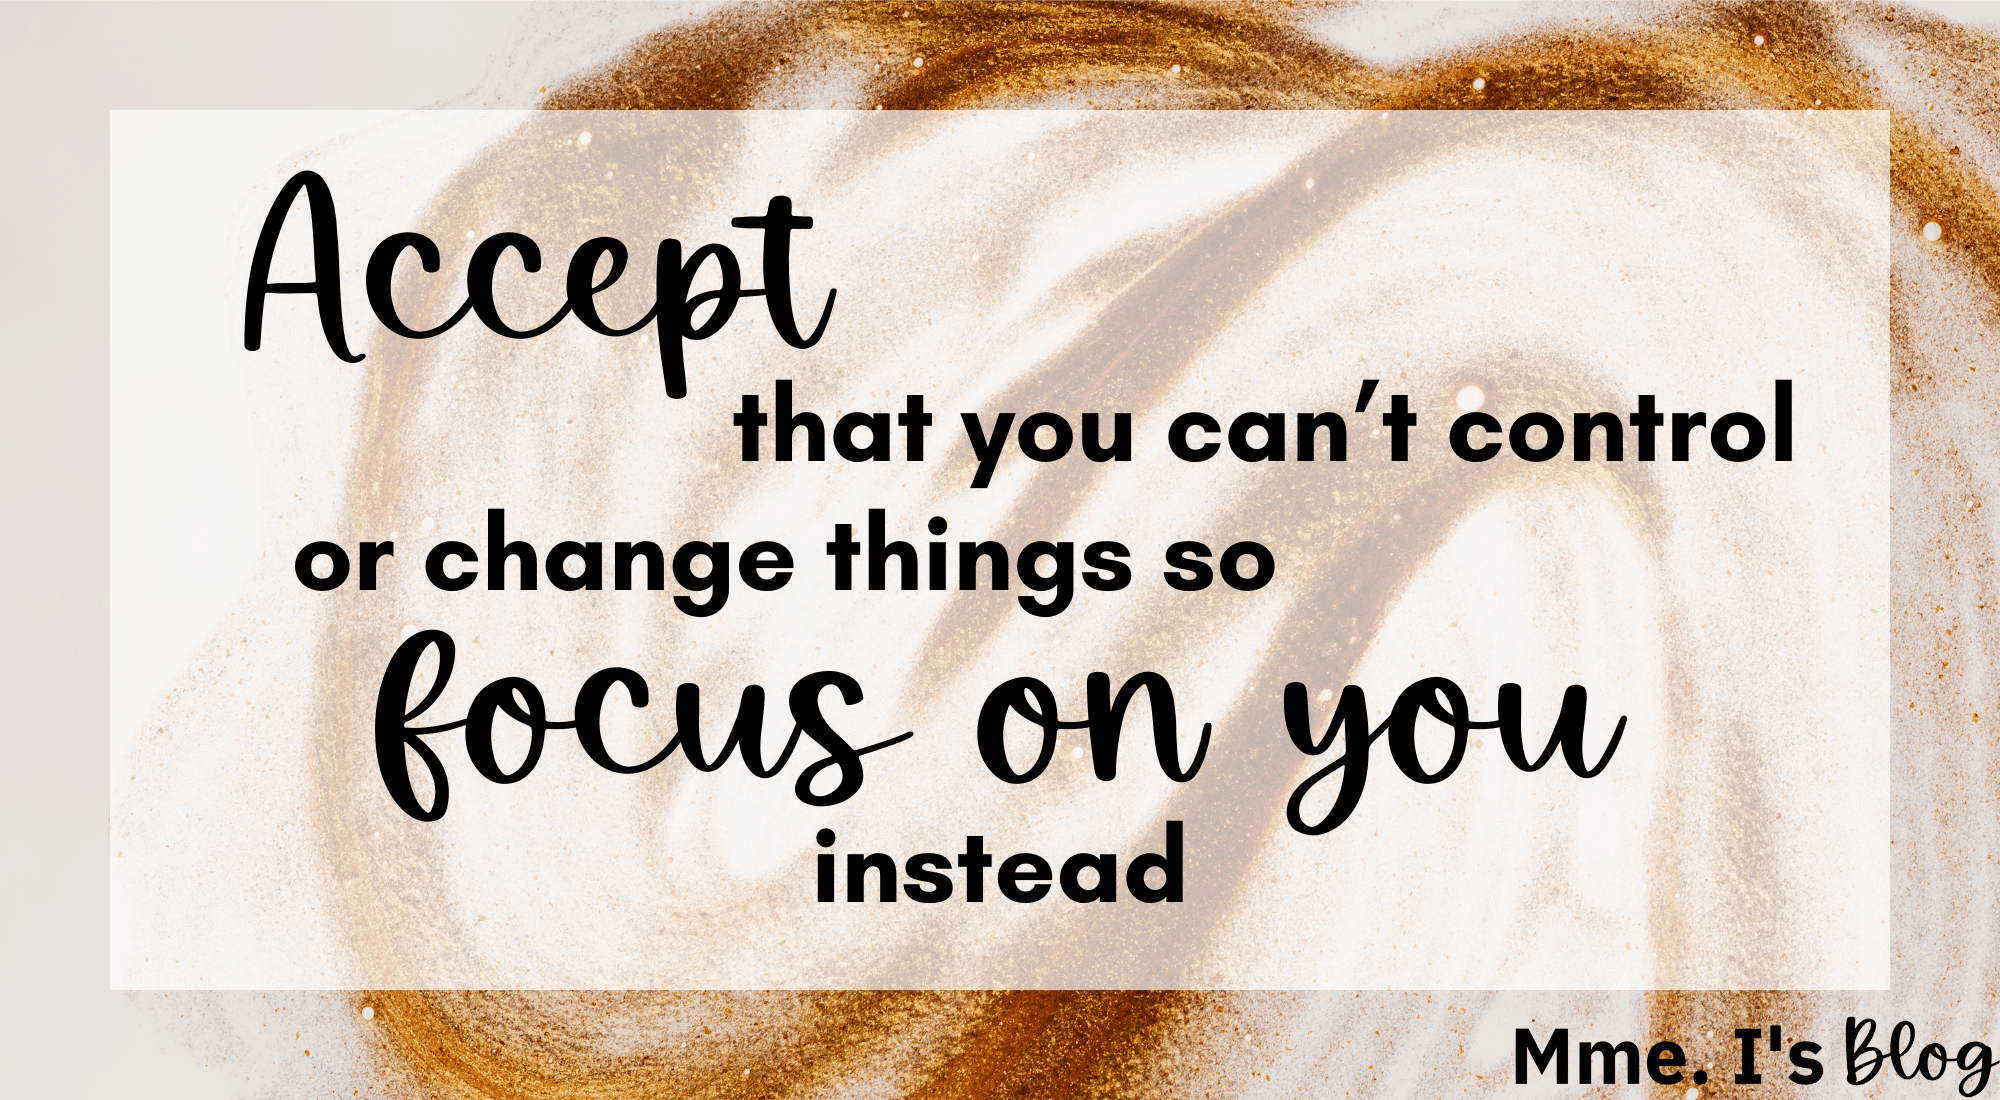 Accept and focus on you